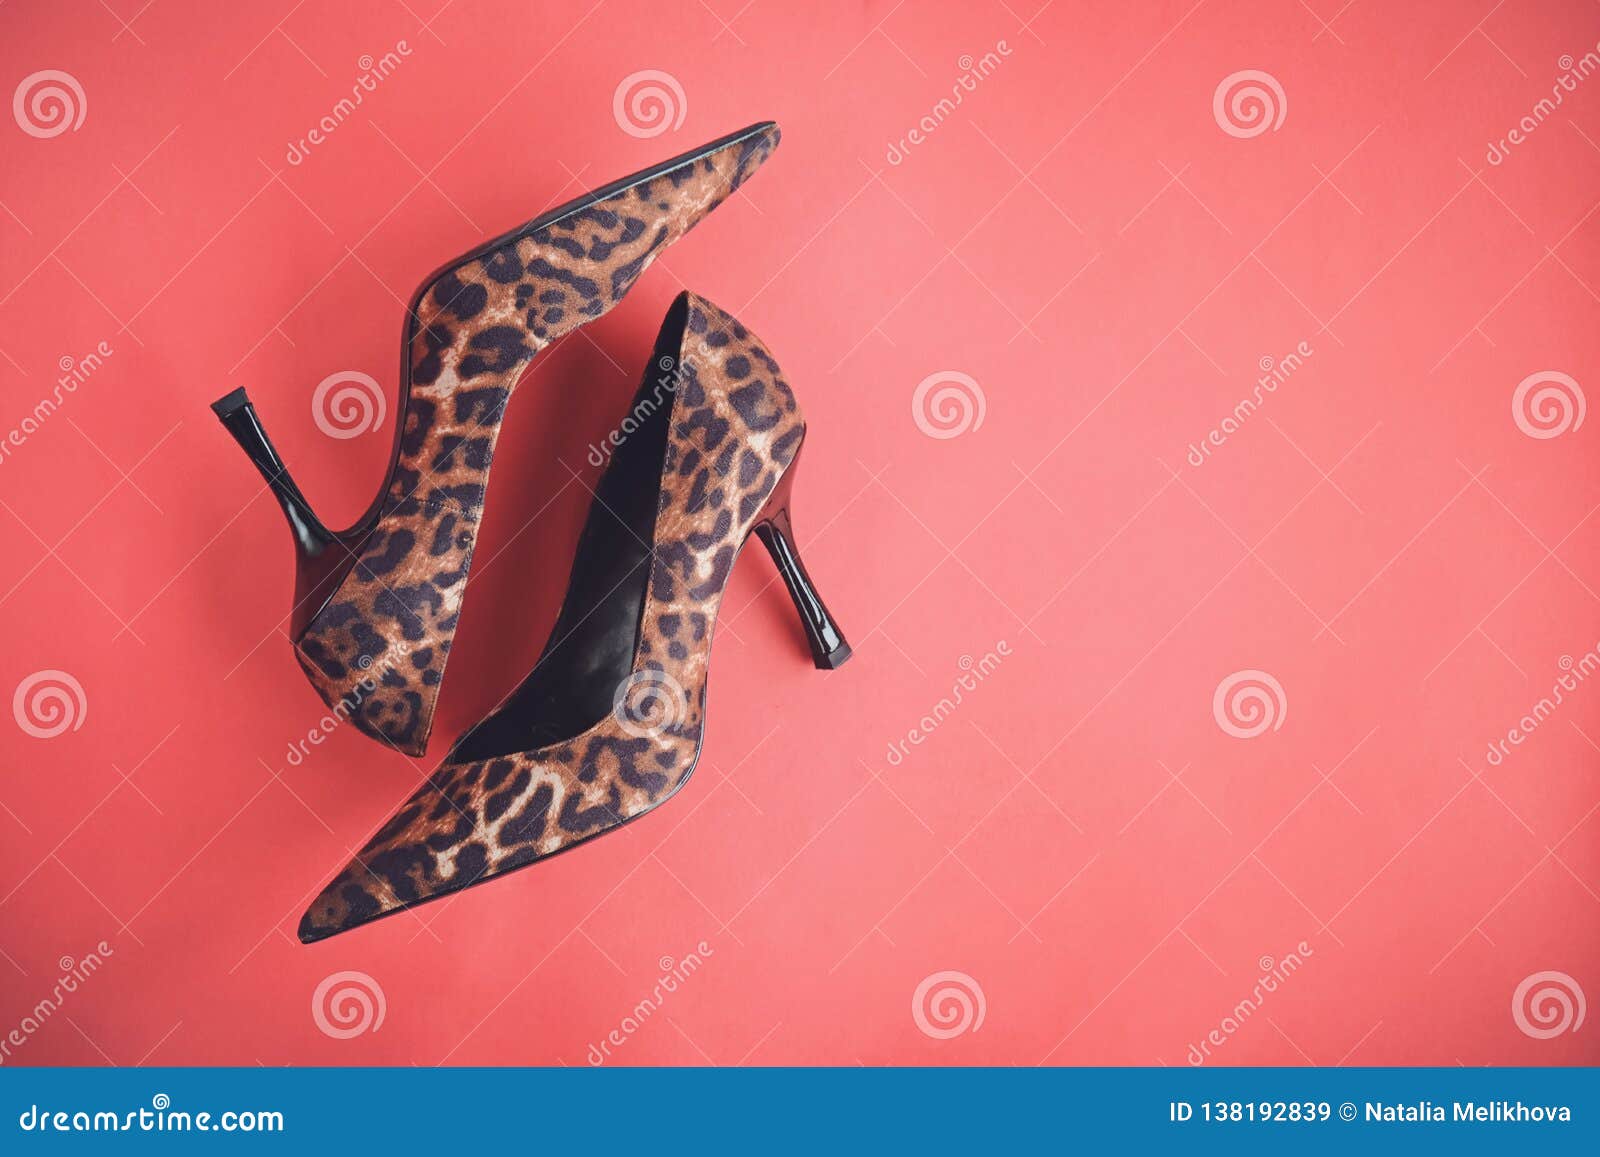 Leopard Print Shoes High Heels on Red ...